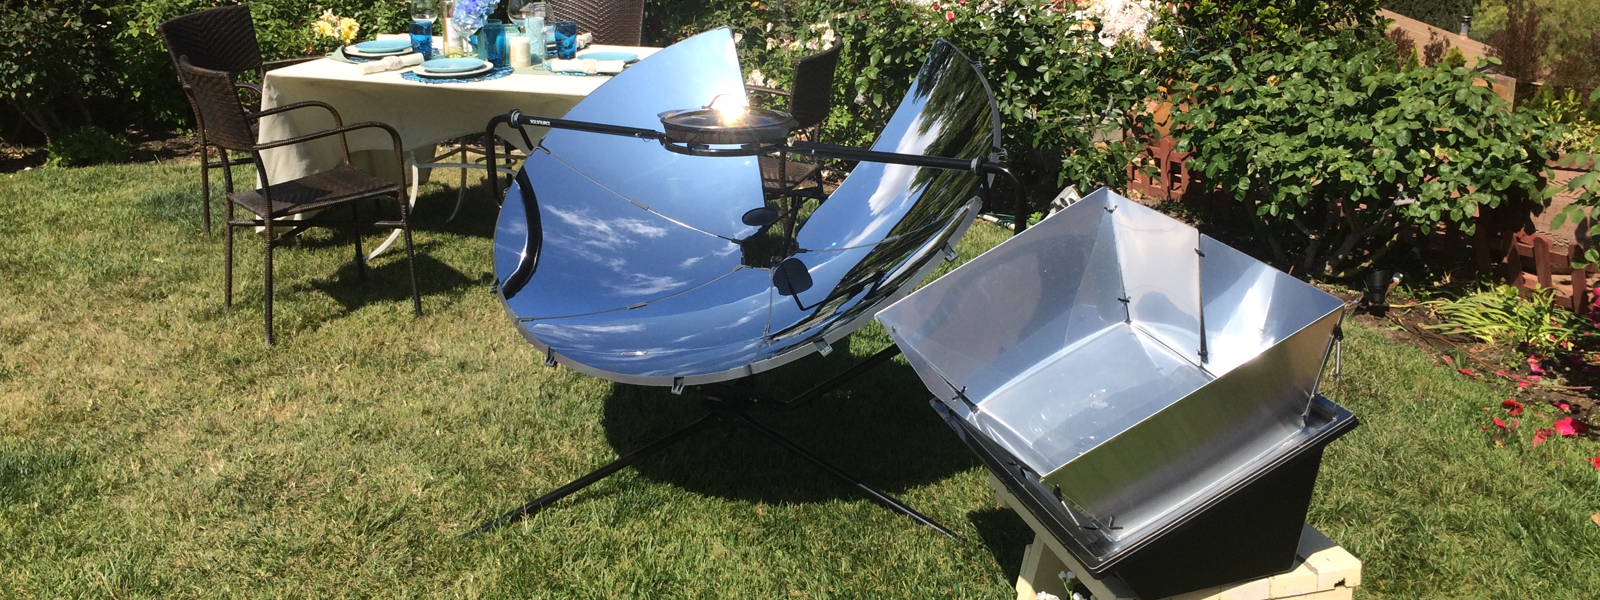 compare-solar-cookers-2-wp-image-001